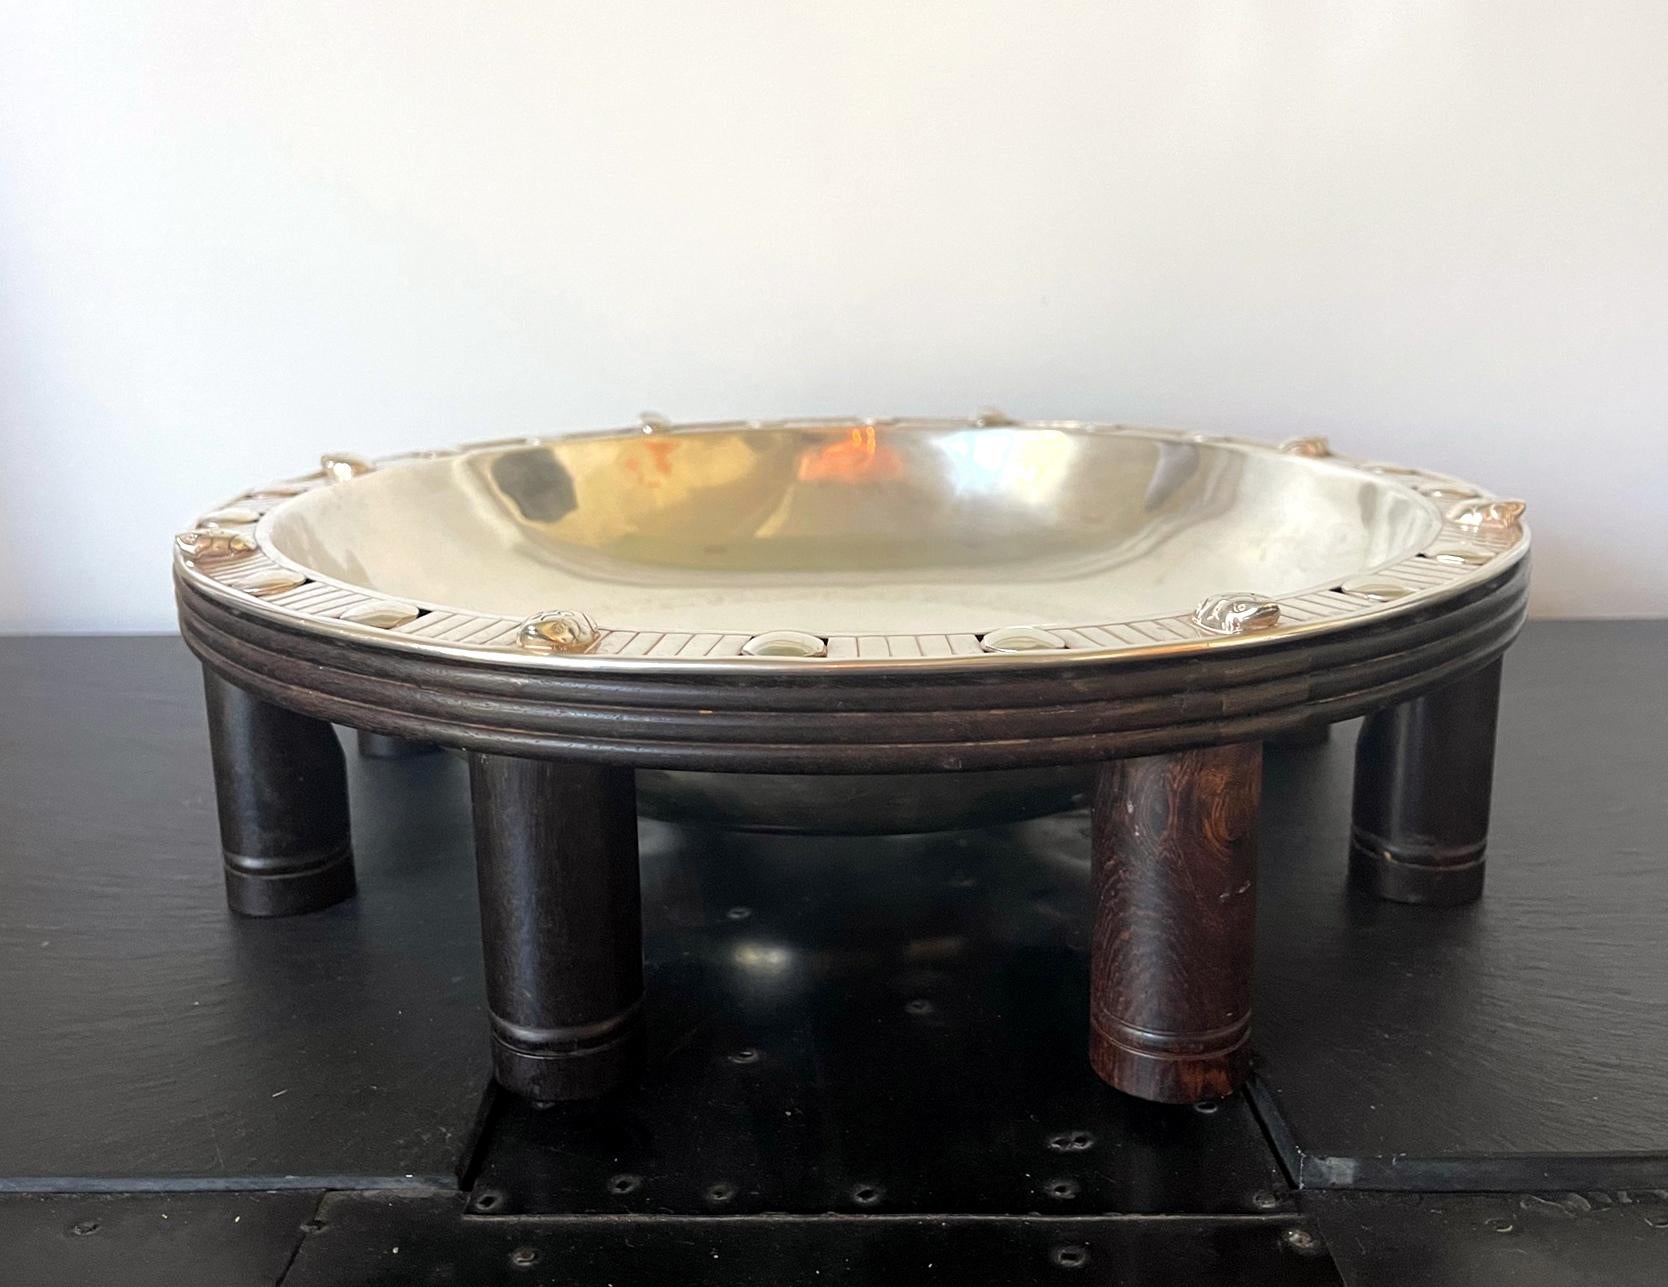 An impressive Mexican modern Mexican center bowl on fitted wood stand by William Spratling (1900-1967) circa 1962-64. Spratling is known for his modern approach of silver design and efforts in revitalizing Taxco silver industry. This rare large